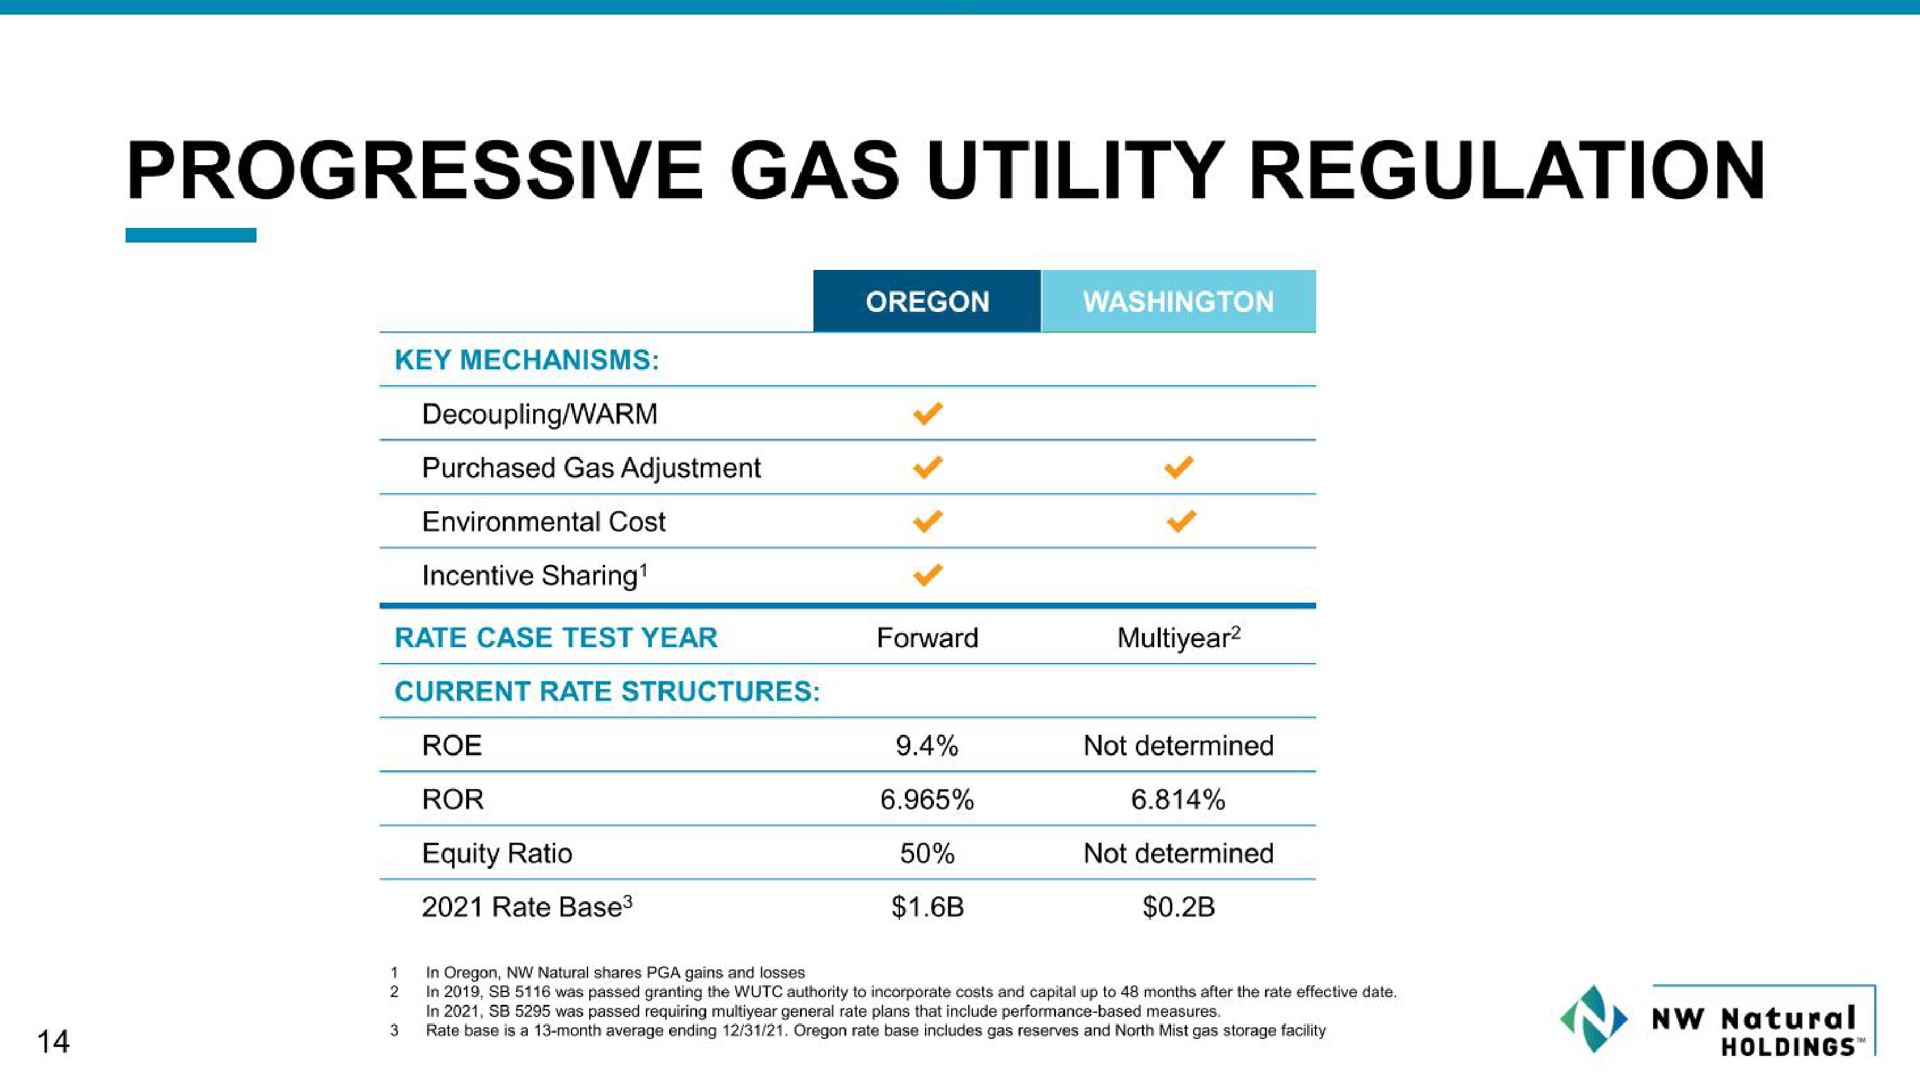 progressive gas utility regulation | NW Natural Holdings